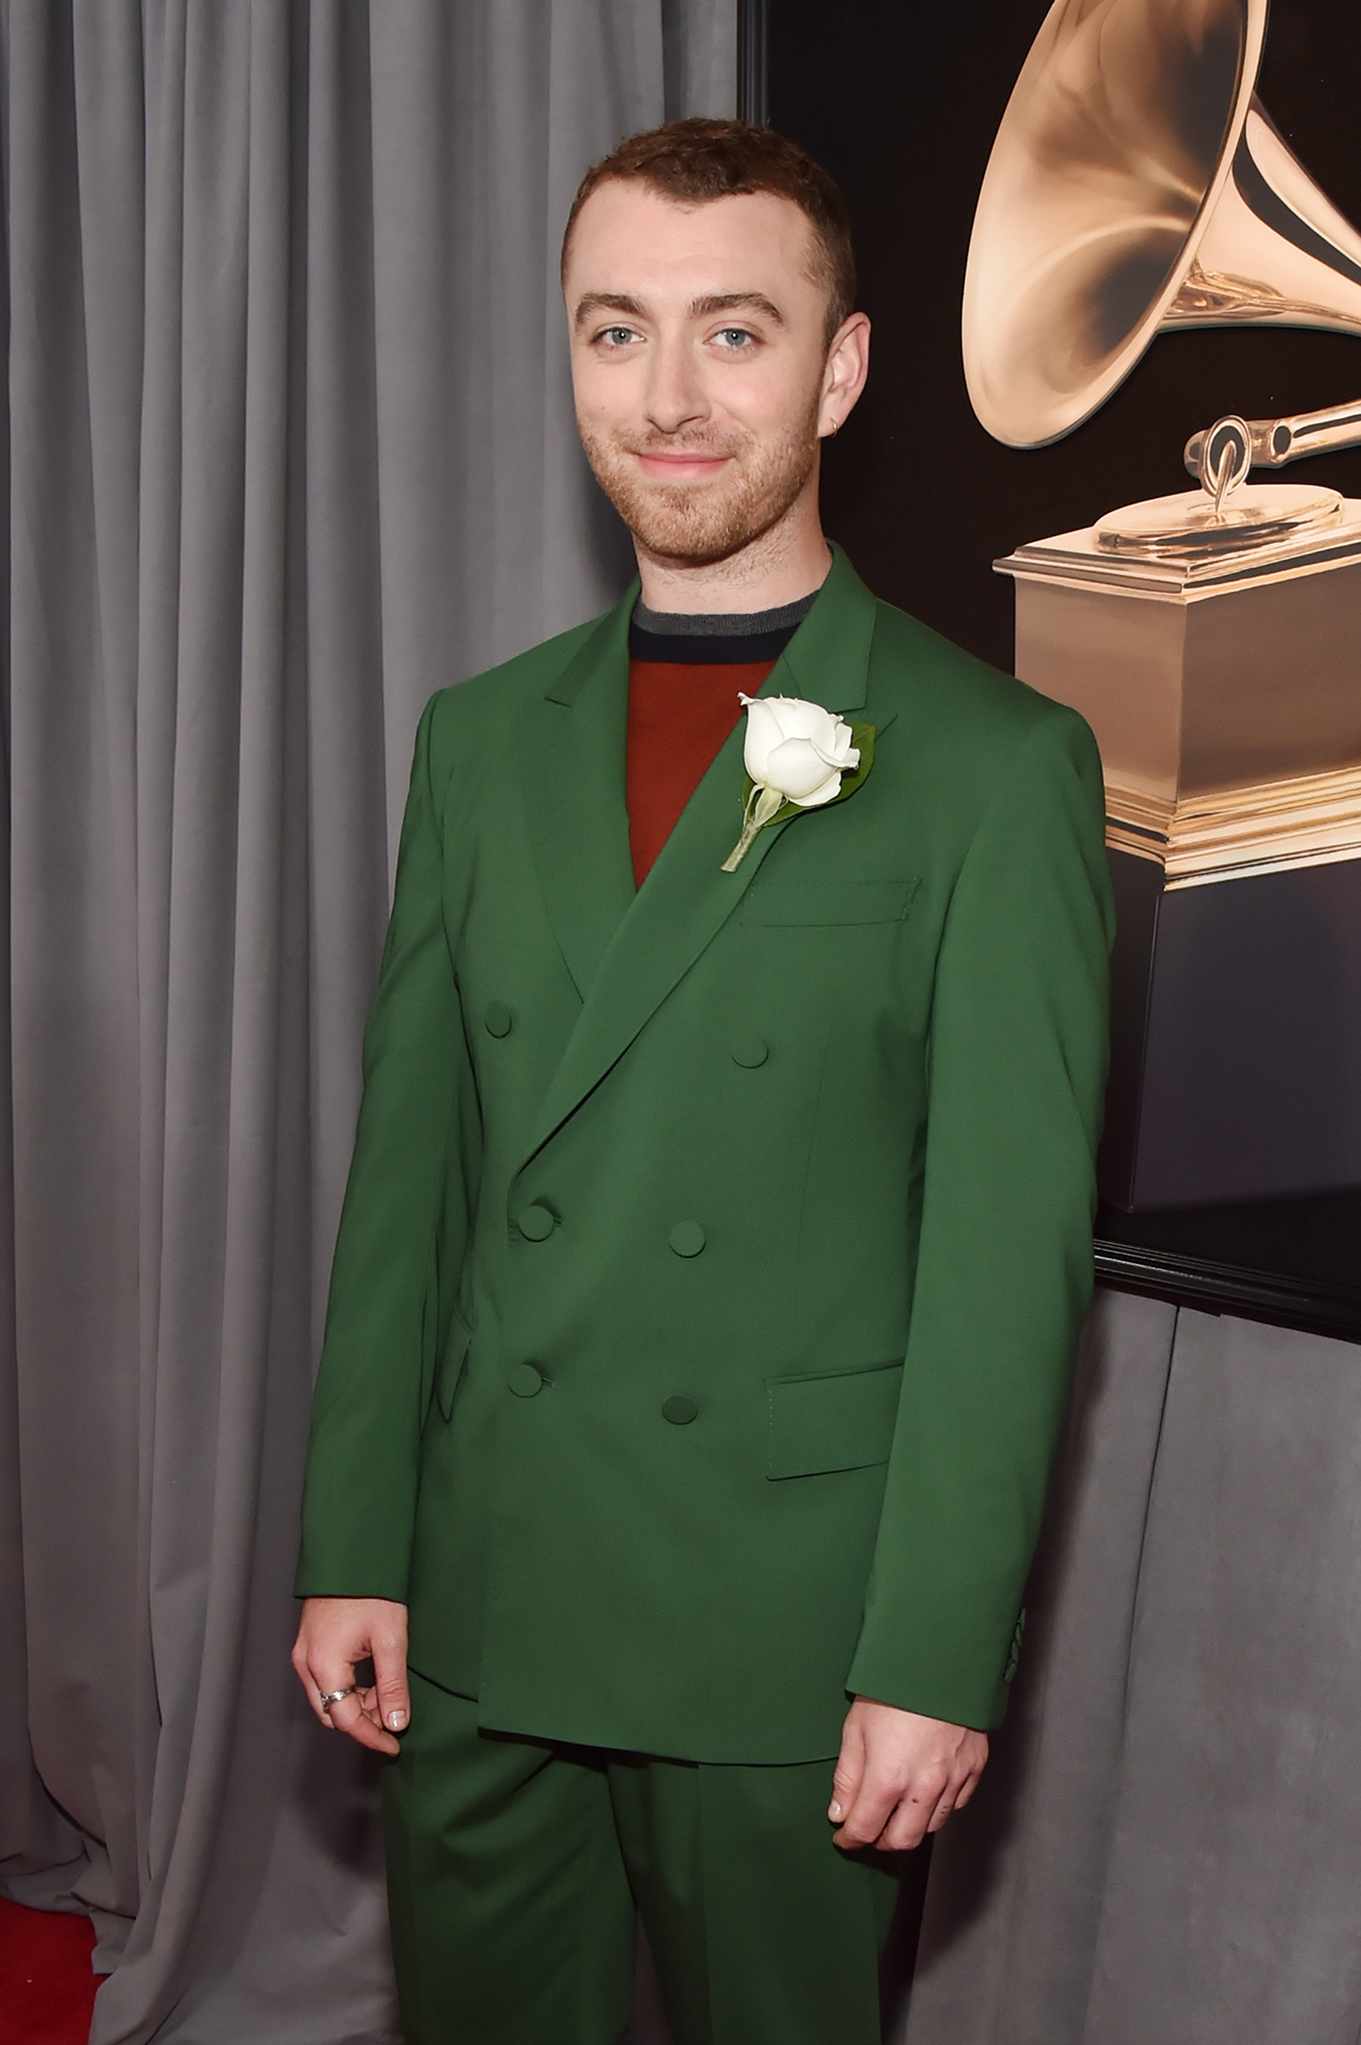 Recording artist Sam Smith, white rose detail, attends the 60th Annual GRAMMY Awards at Madison Square Garden on January 28, 2018 in New York City.